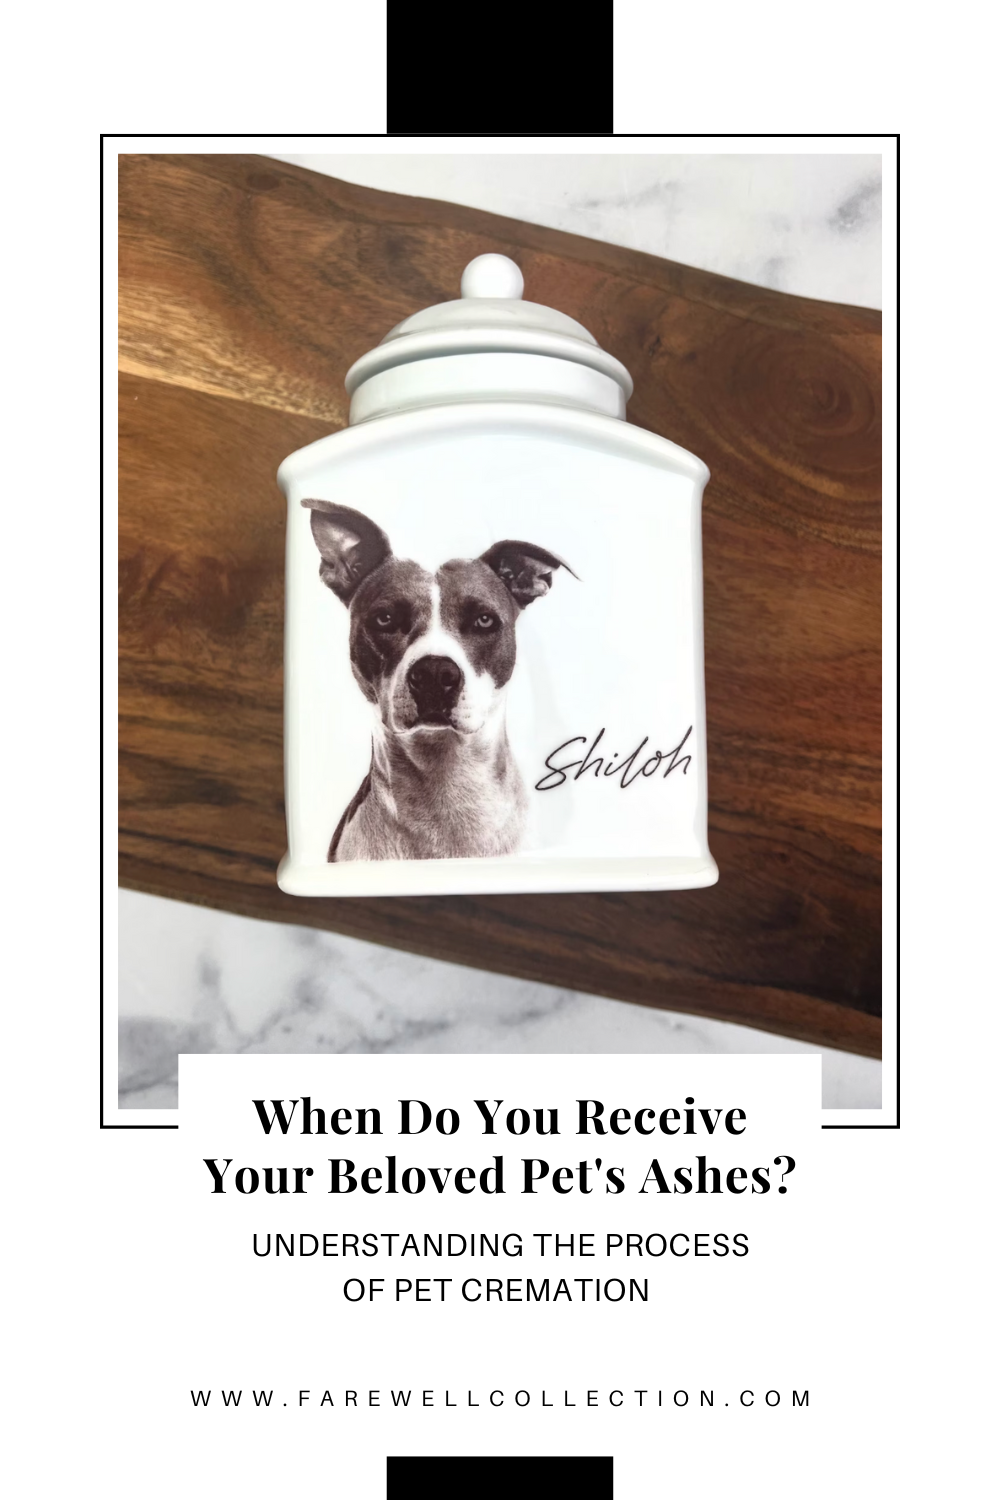 When Do You Receive Your Beloved Pet's Ashes? Understanding the Process of Pet Cremation